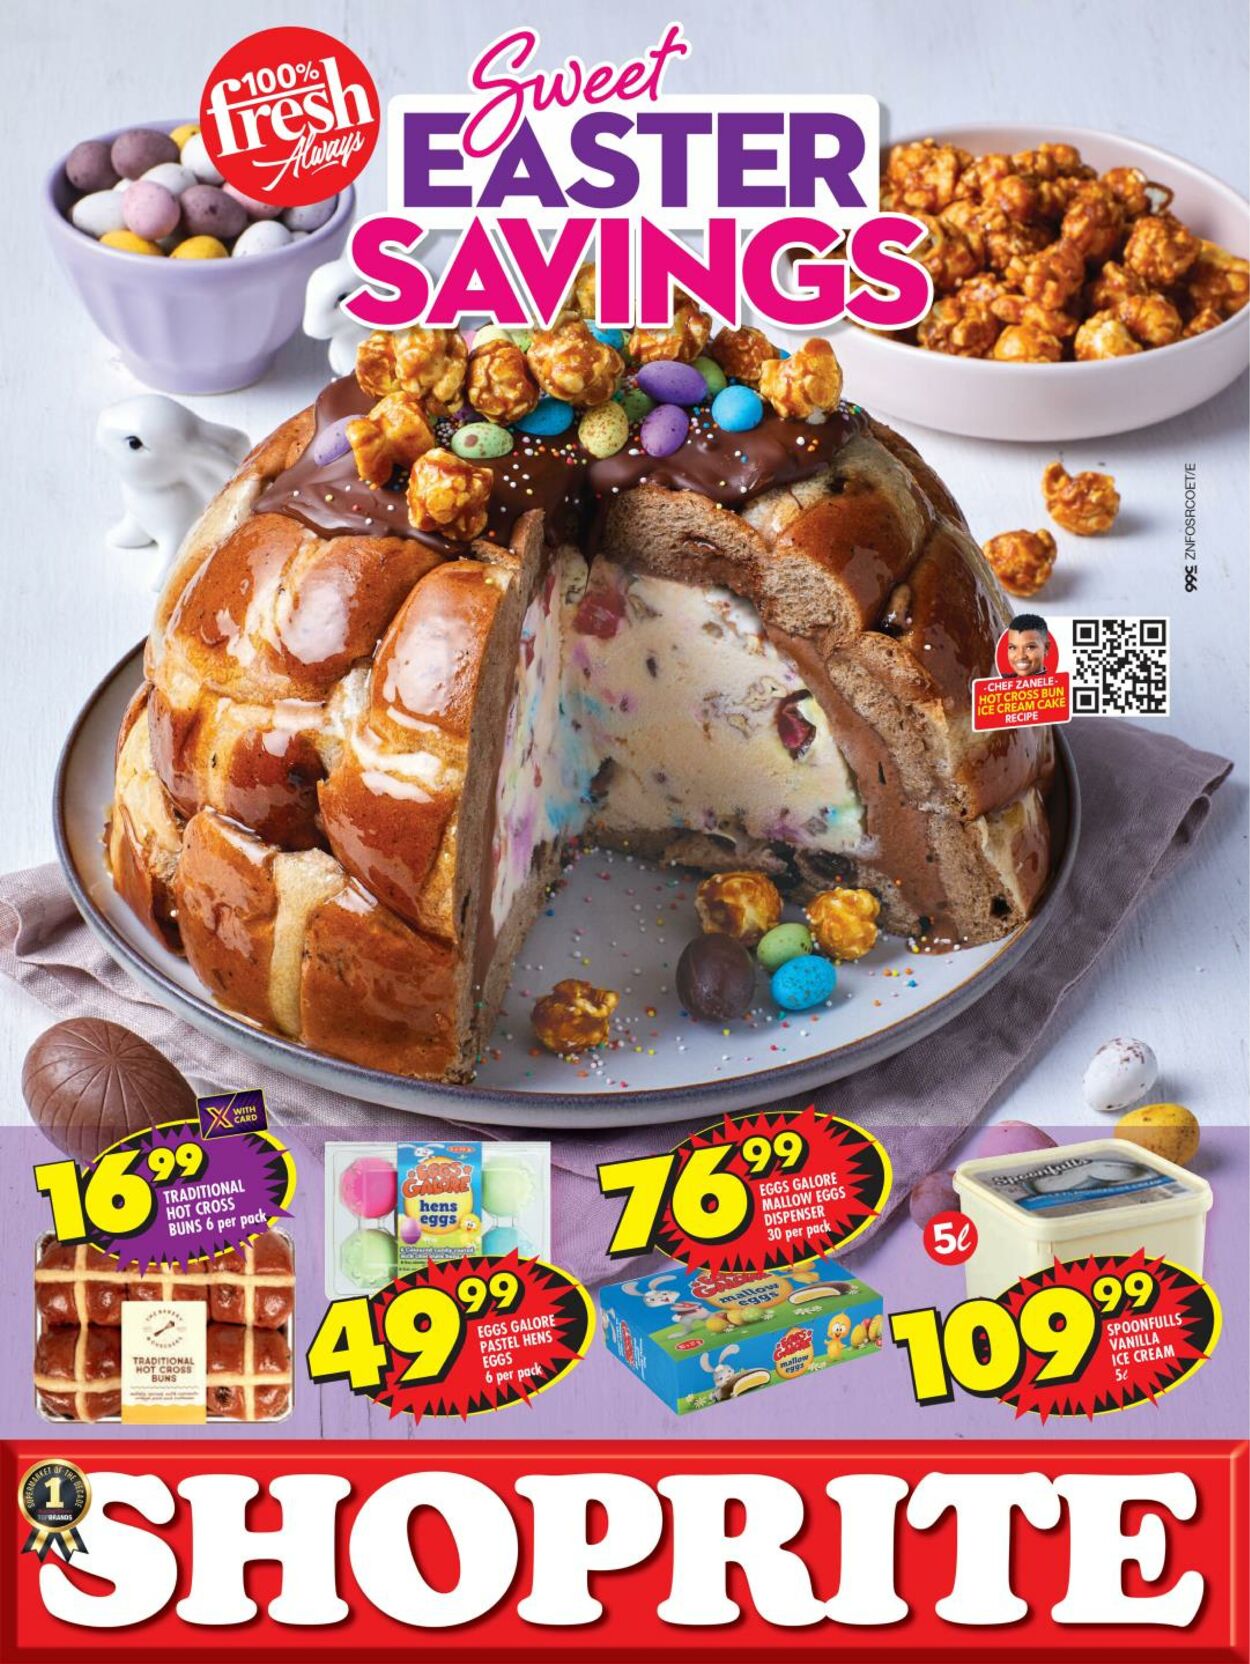 Shoprite Promotional Leaflet Easter Valid from 27.03 to 10.04